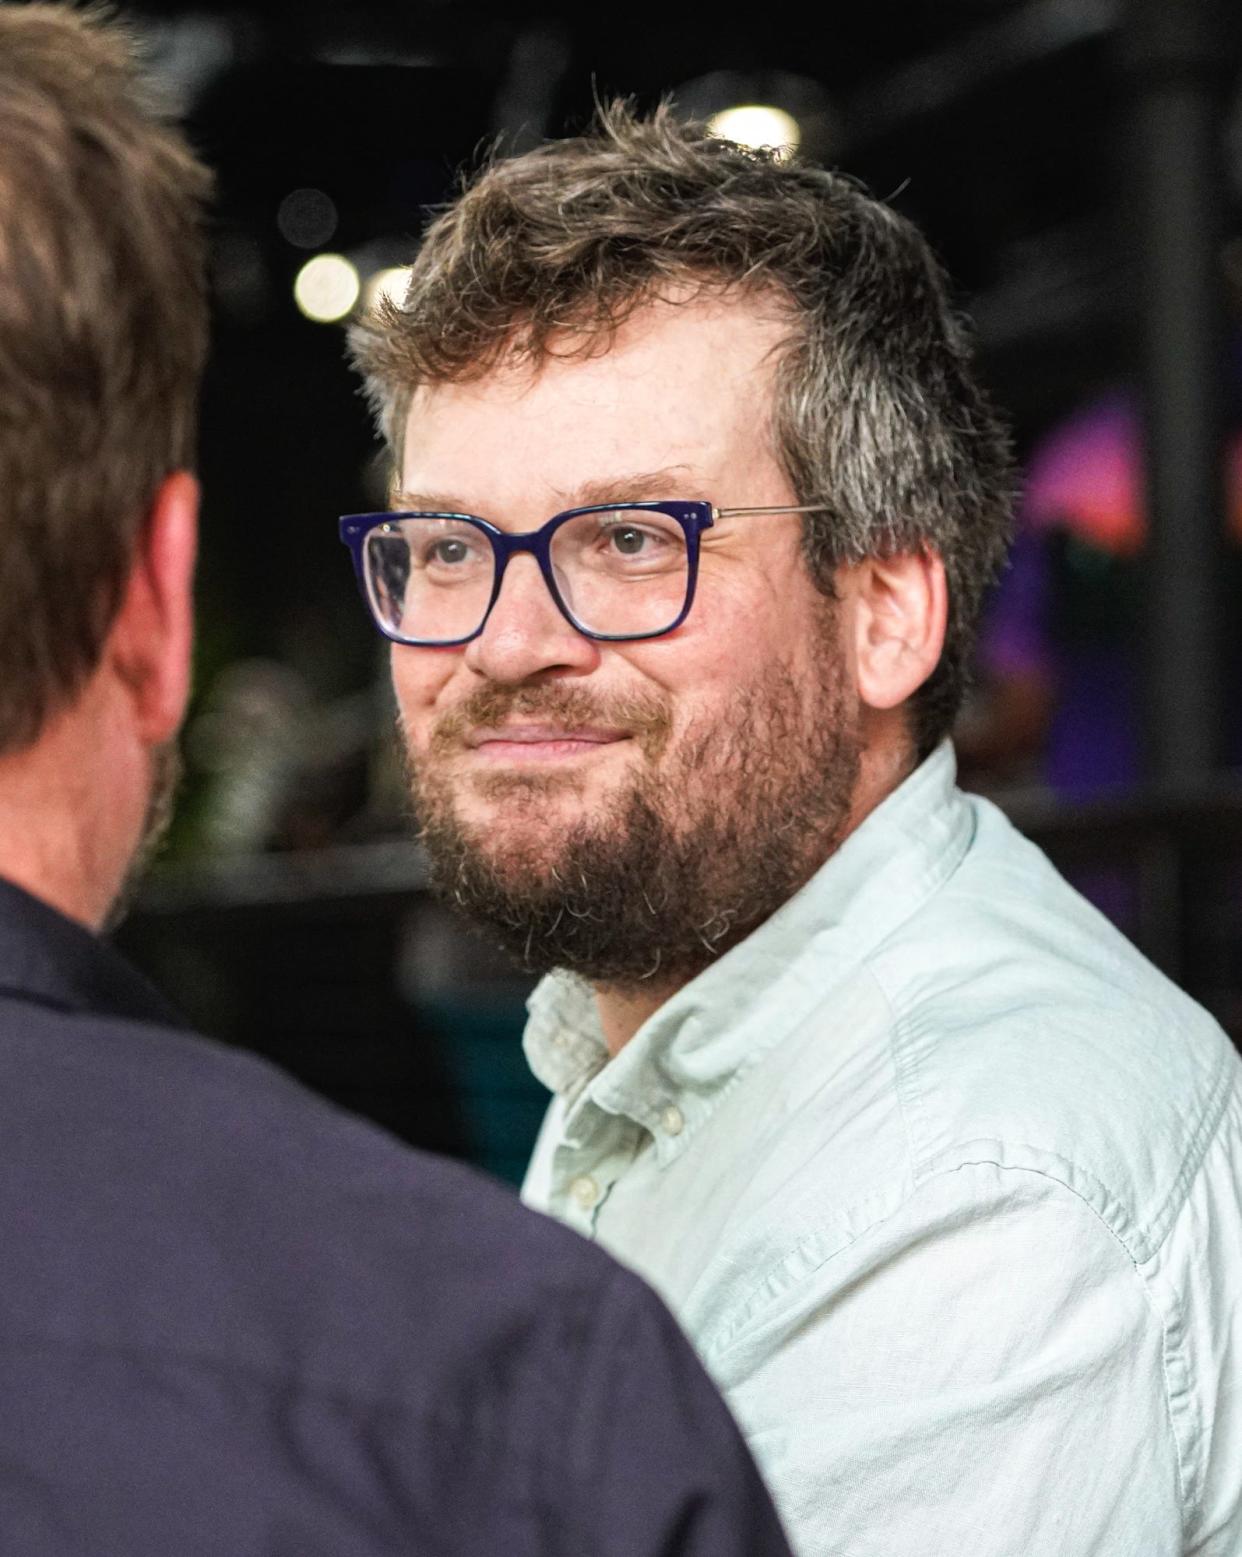 Author,YouTube content creator, and podcaster, John Green attends preview night for the second annual "Butter" fine art fair presented by Ganggang on Thursday, Sept. 1, 2022, at the Stutz Building in Indianapolis. The art fair features more than 50 black artists, with a focus on equity. 